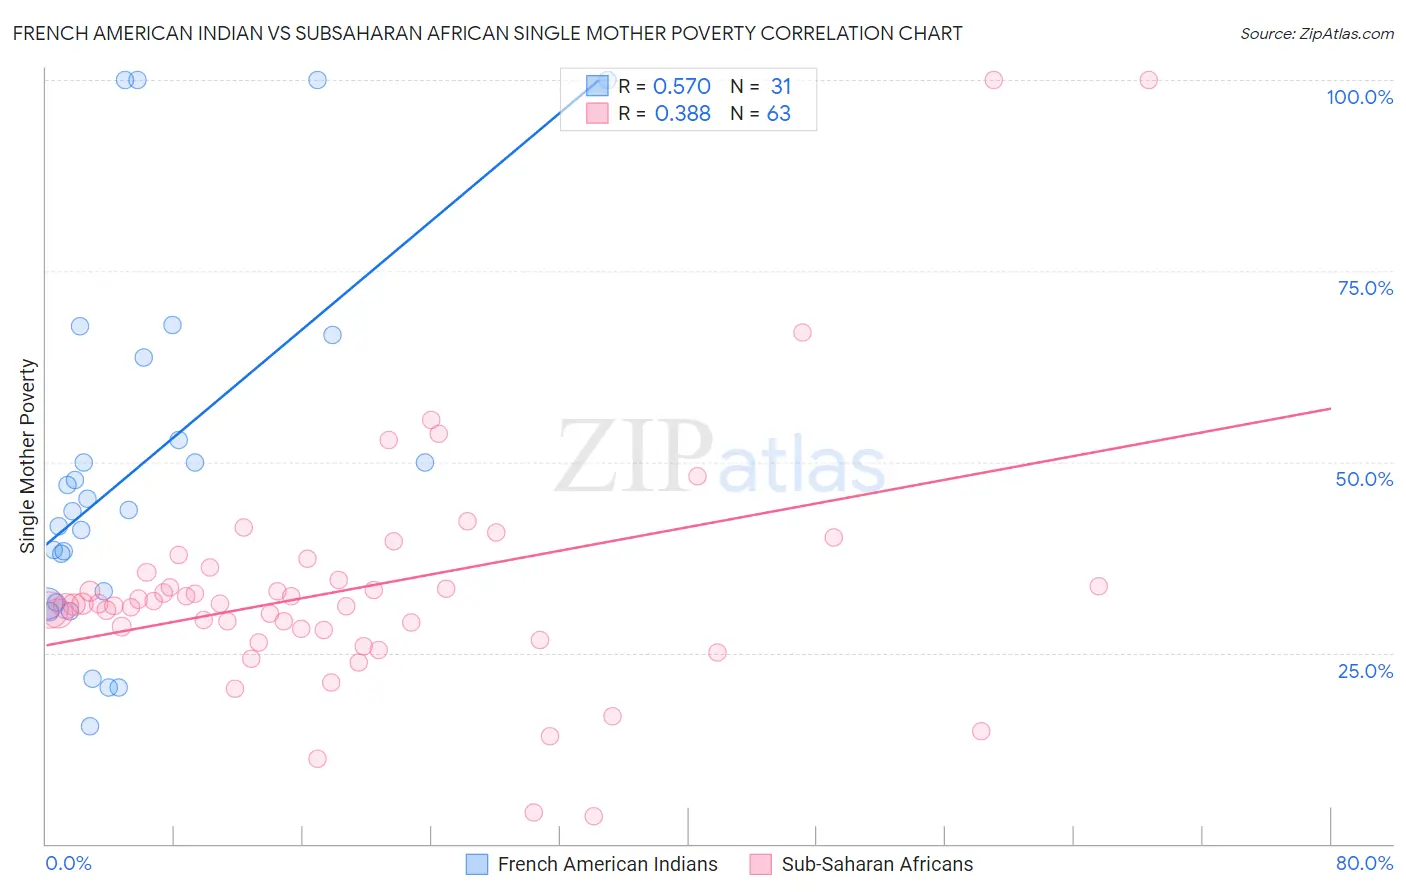 French American Indian vs Subsaharan African Single Mother Poverty